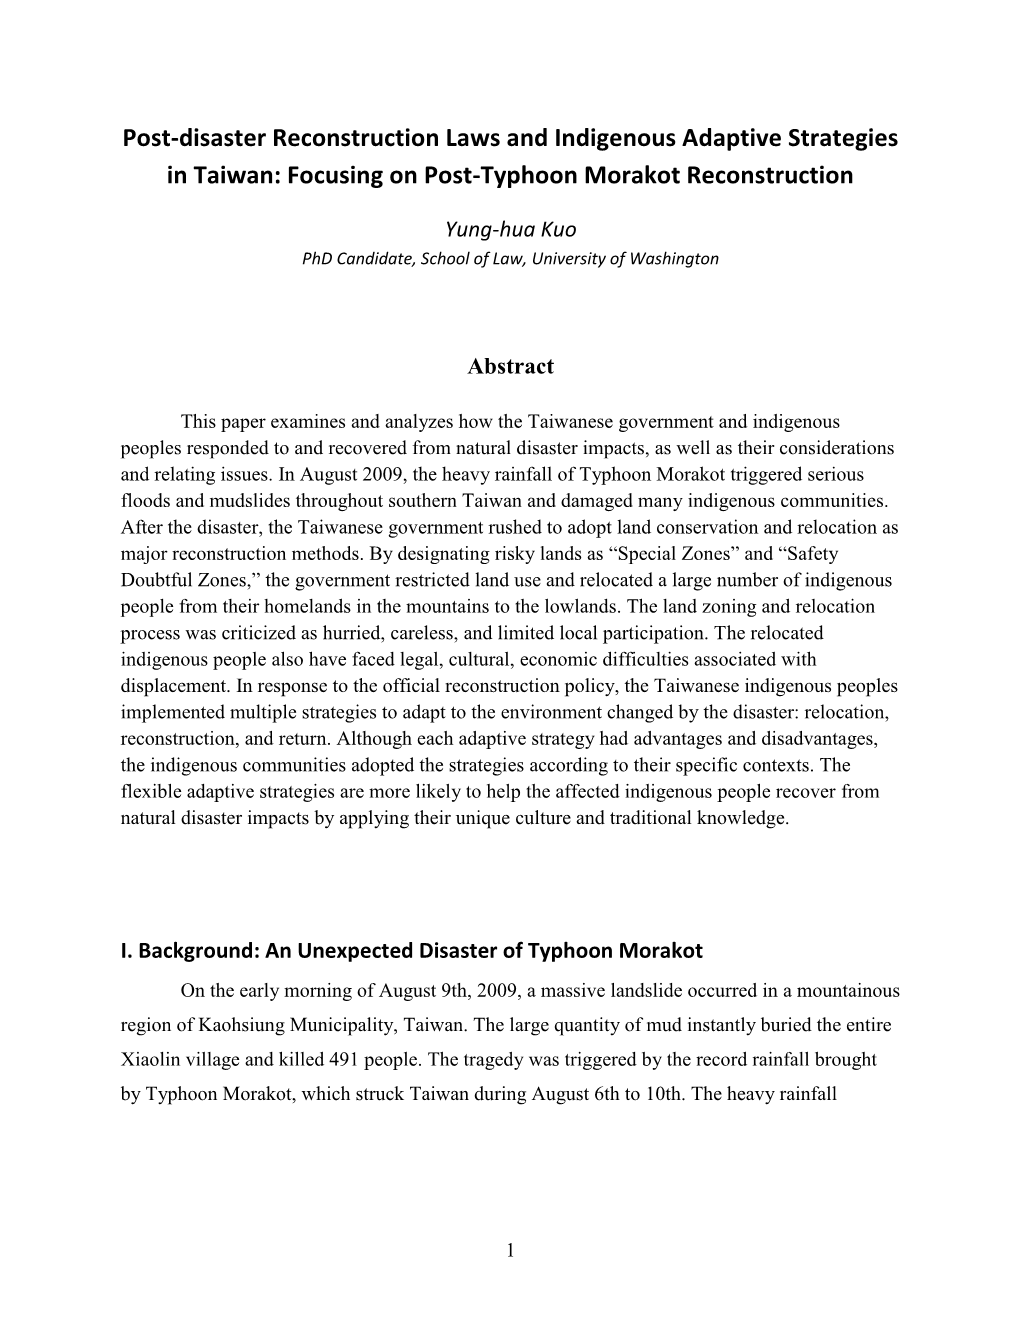 Post-Disaster Reconstruction Laws and Indigenous Adaptive Strategies in Taiwan: Focusing on Post-Typhoon Morakot Reconstruction